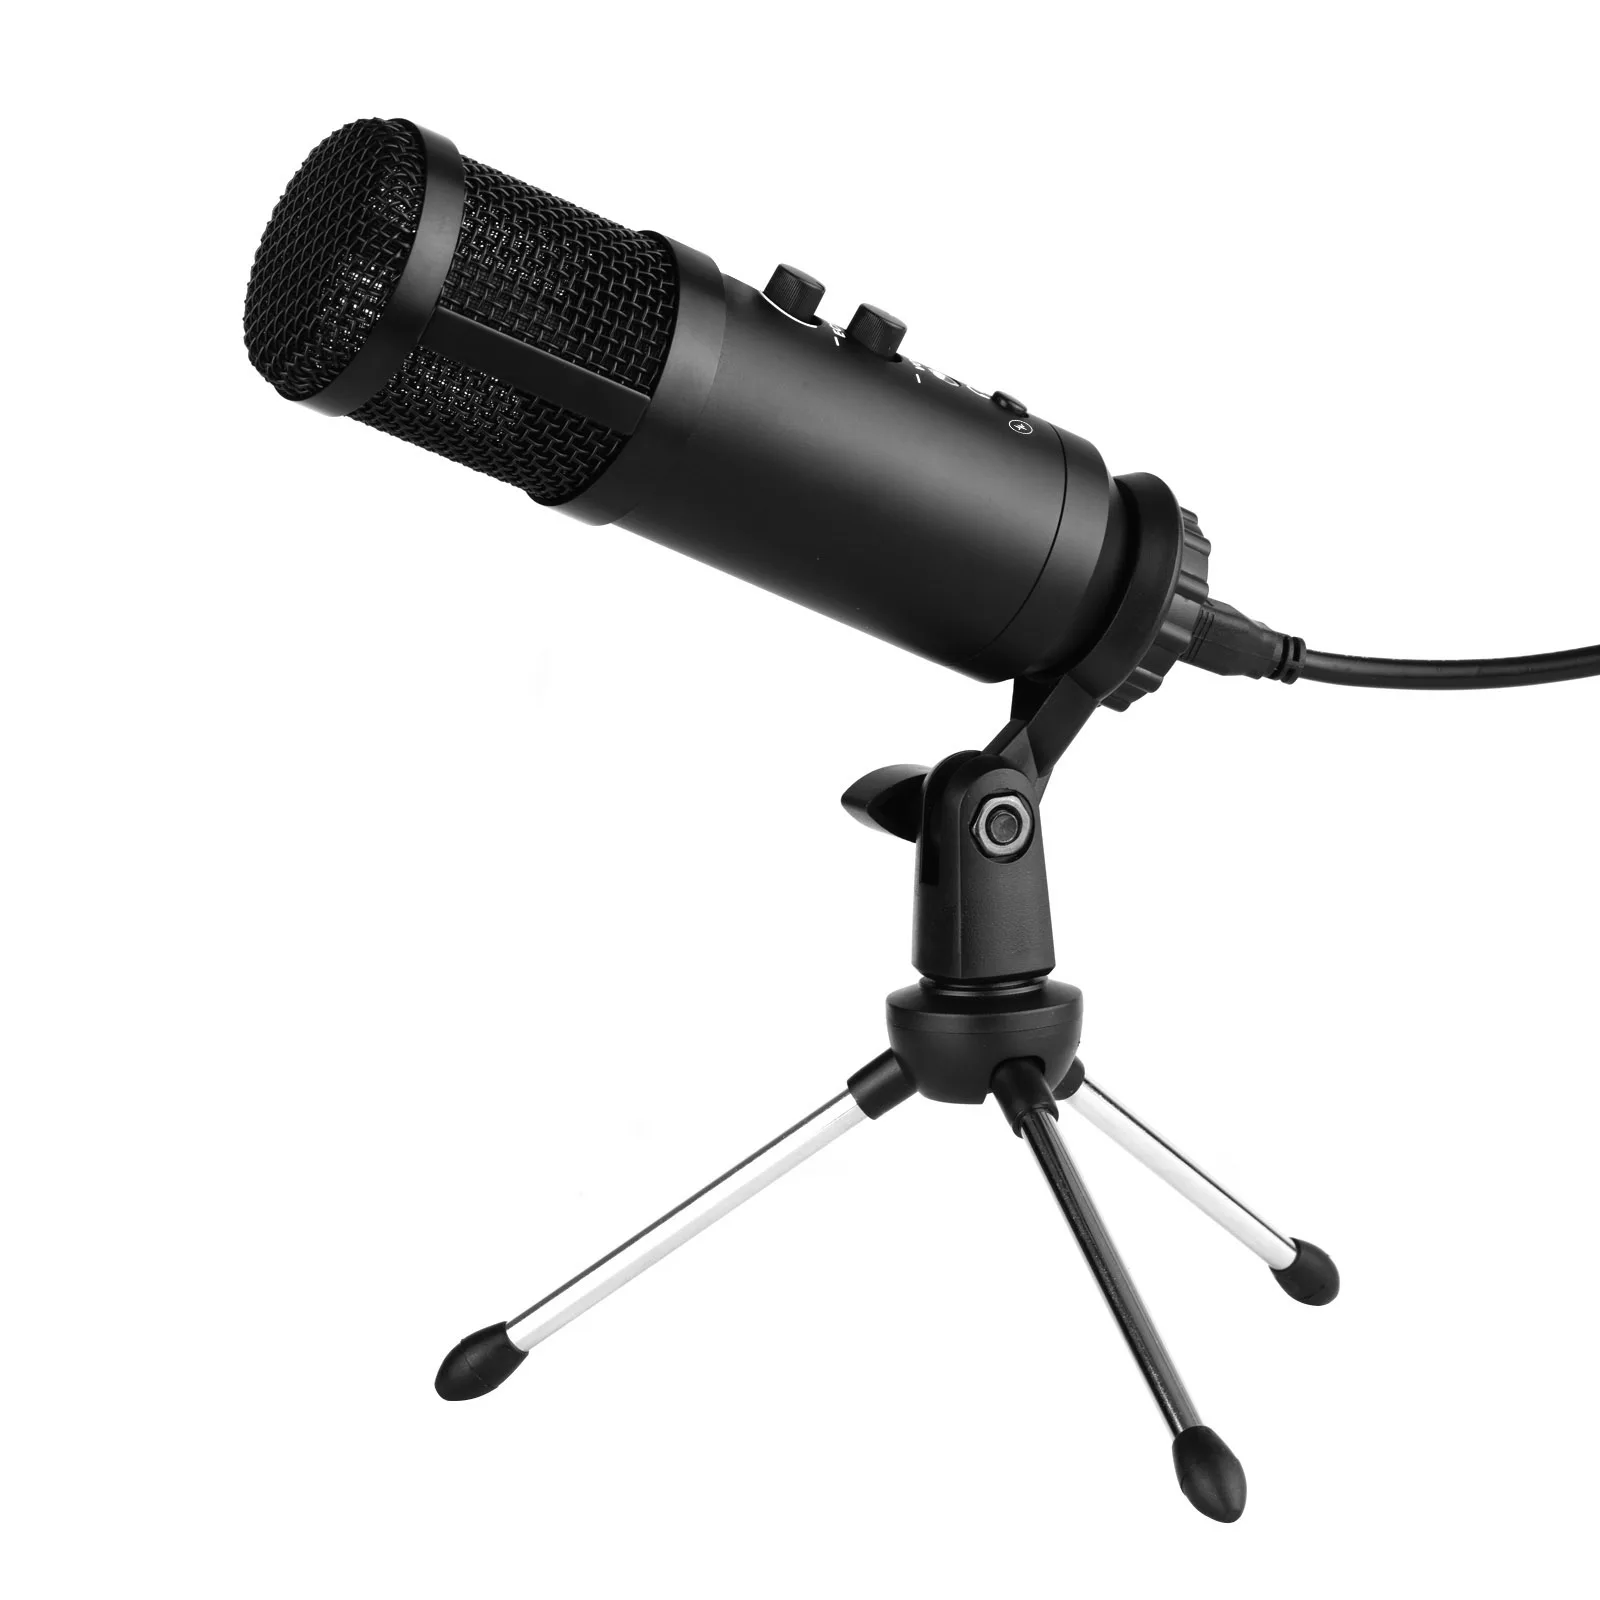 

USB Condenser Microphone BT Connection Mic with Desktop Metal Tripod Windscreen USB Cable for Music Recording Live Streaming